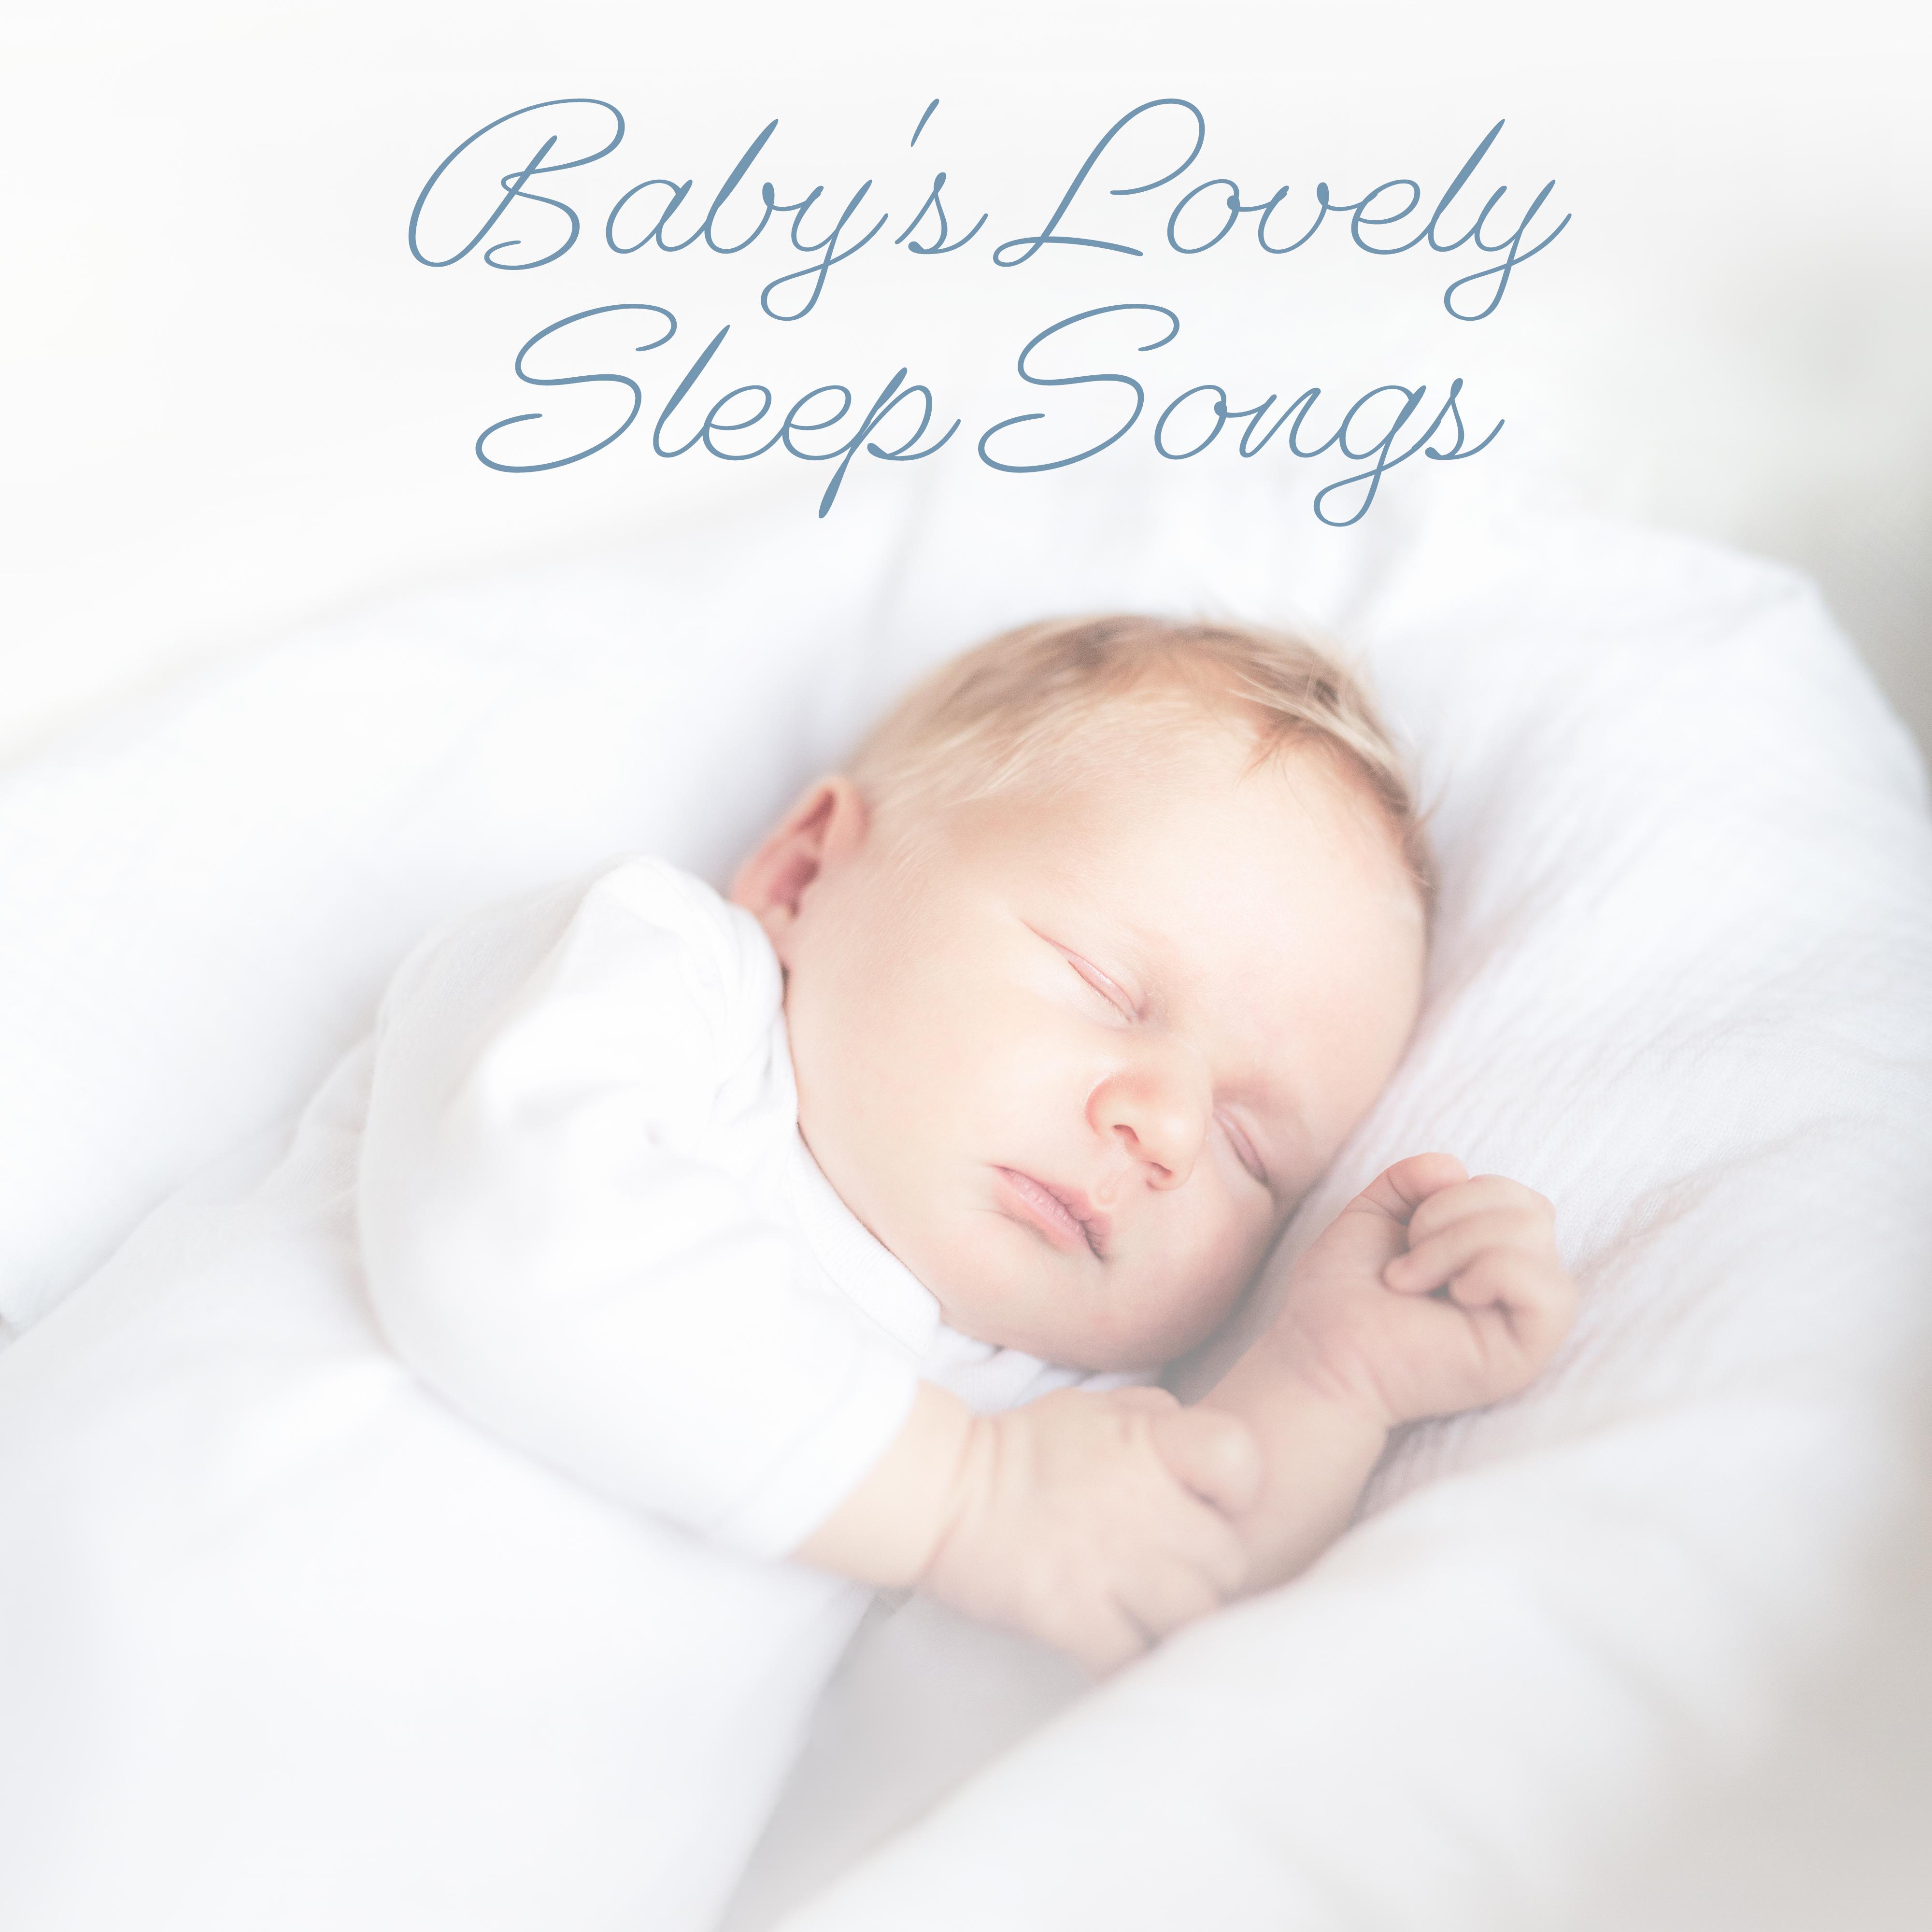 Baby's Lovely Sleep Songs: New Age Soft Music 2019 for Baby's Calming Sleep All Night Long